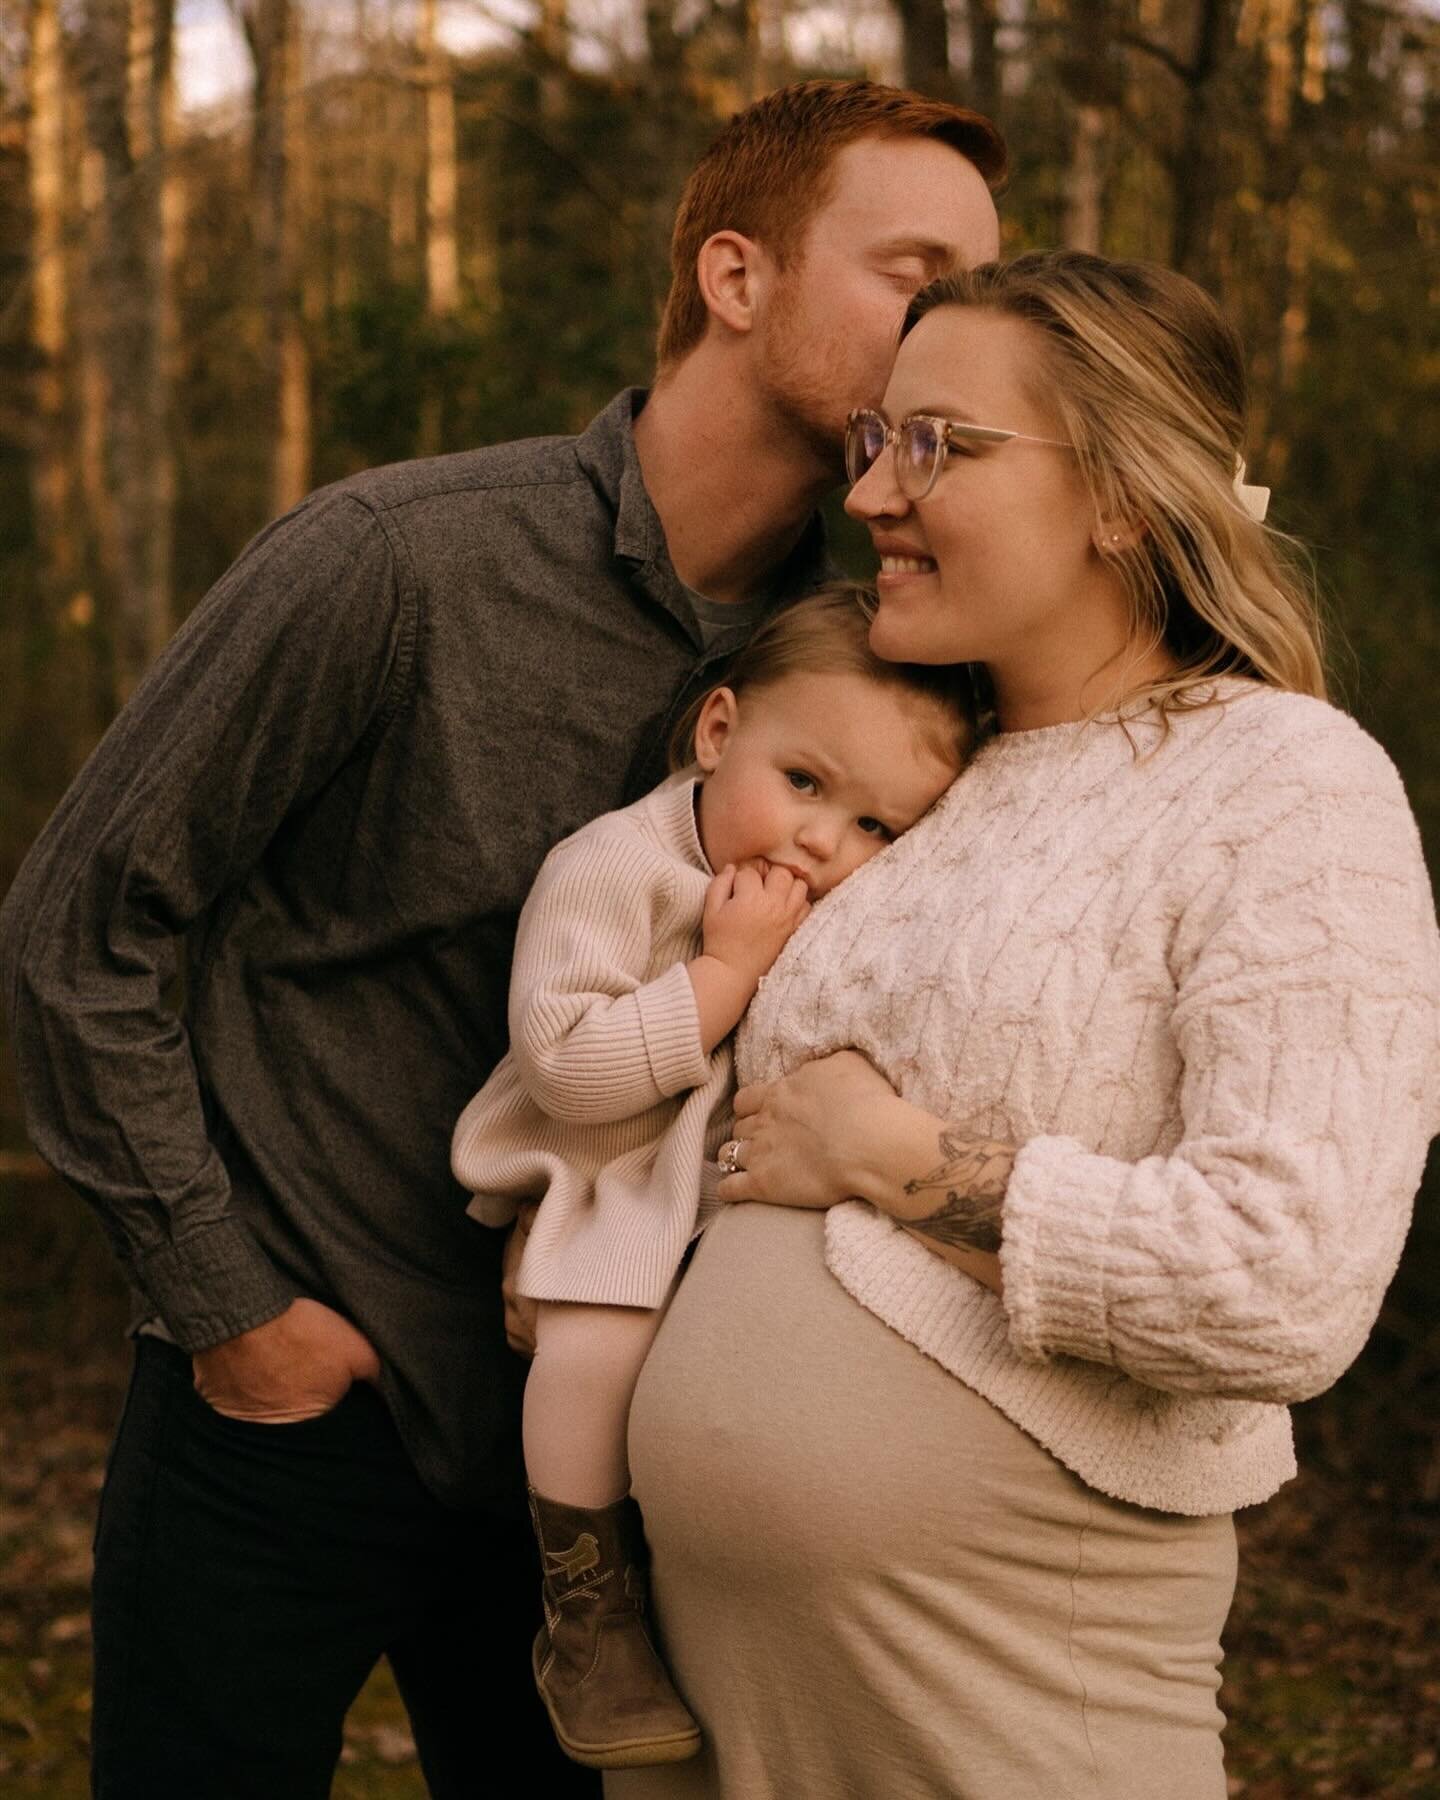 Can&rsquo;t wait for these three to meet Isla Clare. 🩵🐚 

#maternityphotographer #ashevillephotographer #familyphotographer #brevardnc #ashevillenc #wncphotographer #brevardphotographer #familyphotos #maternitysession #maternityshoot